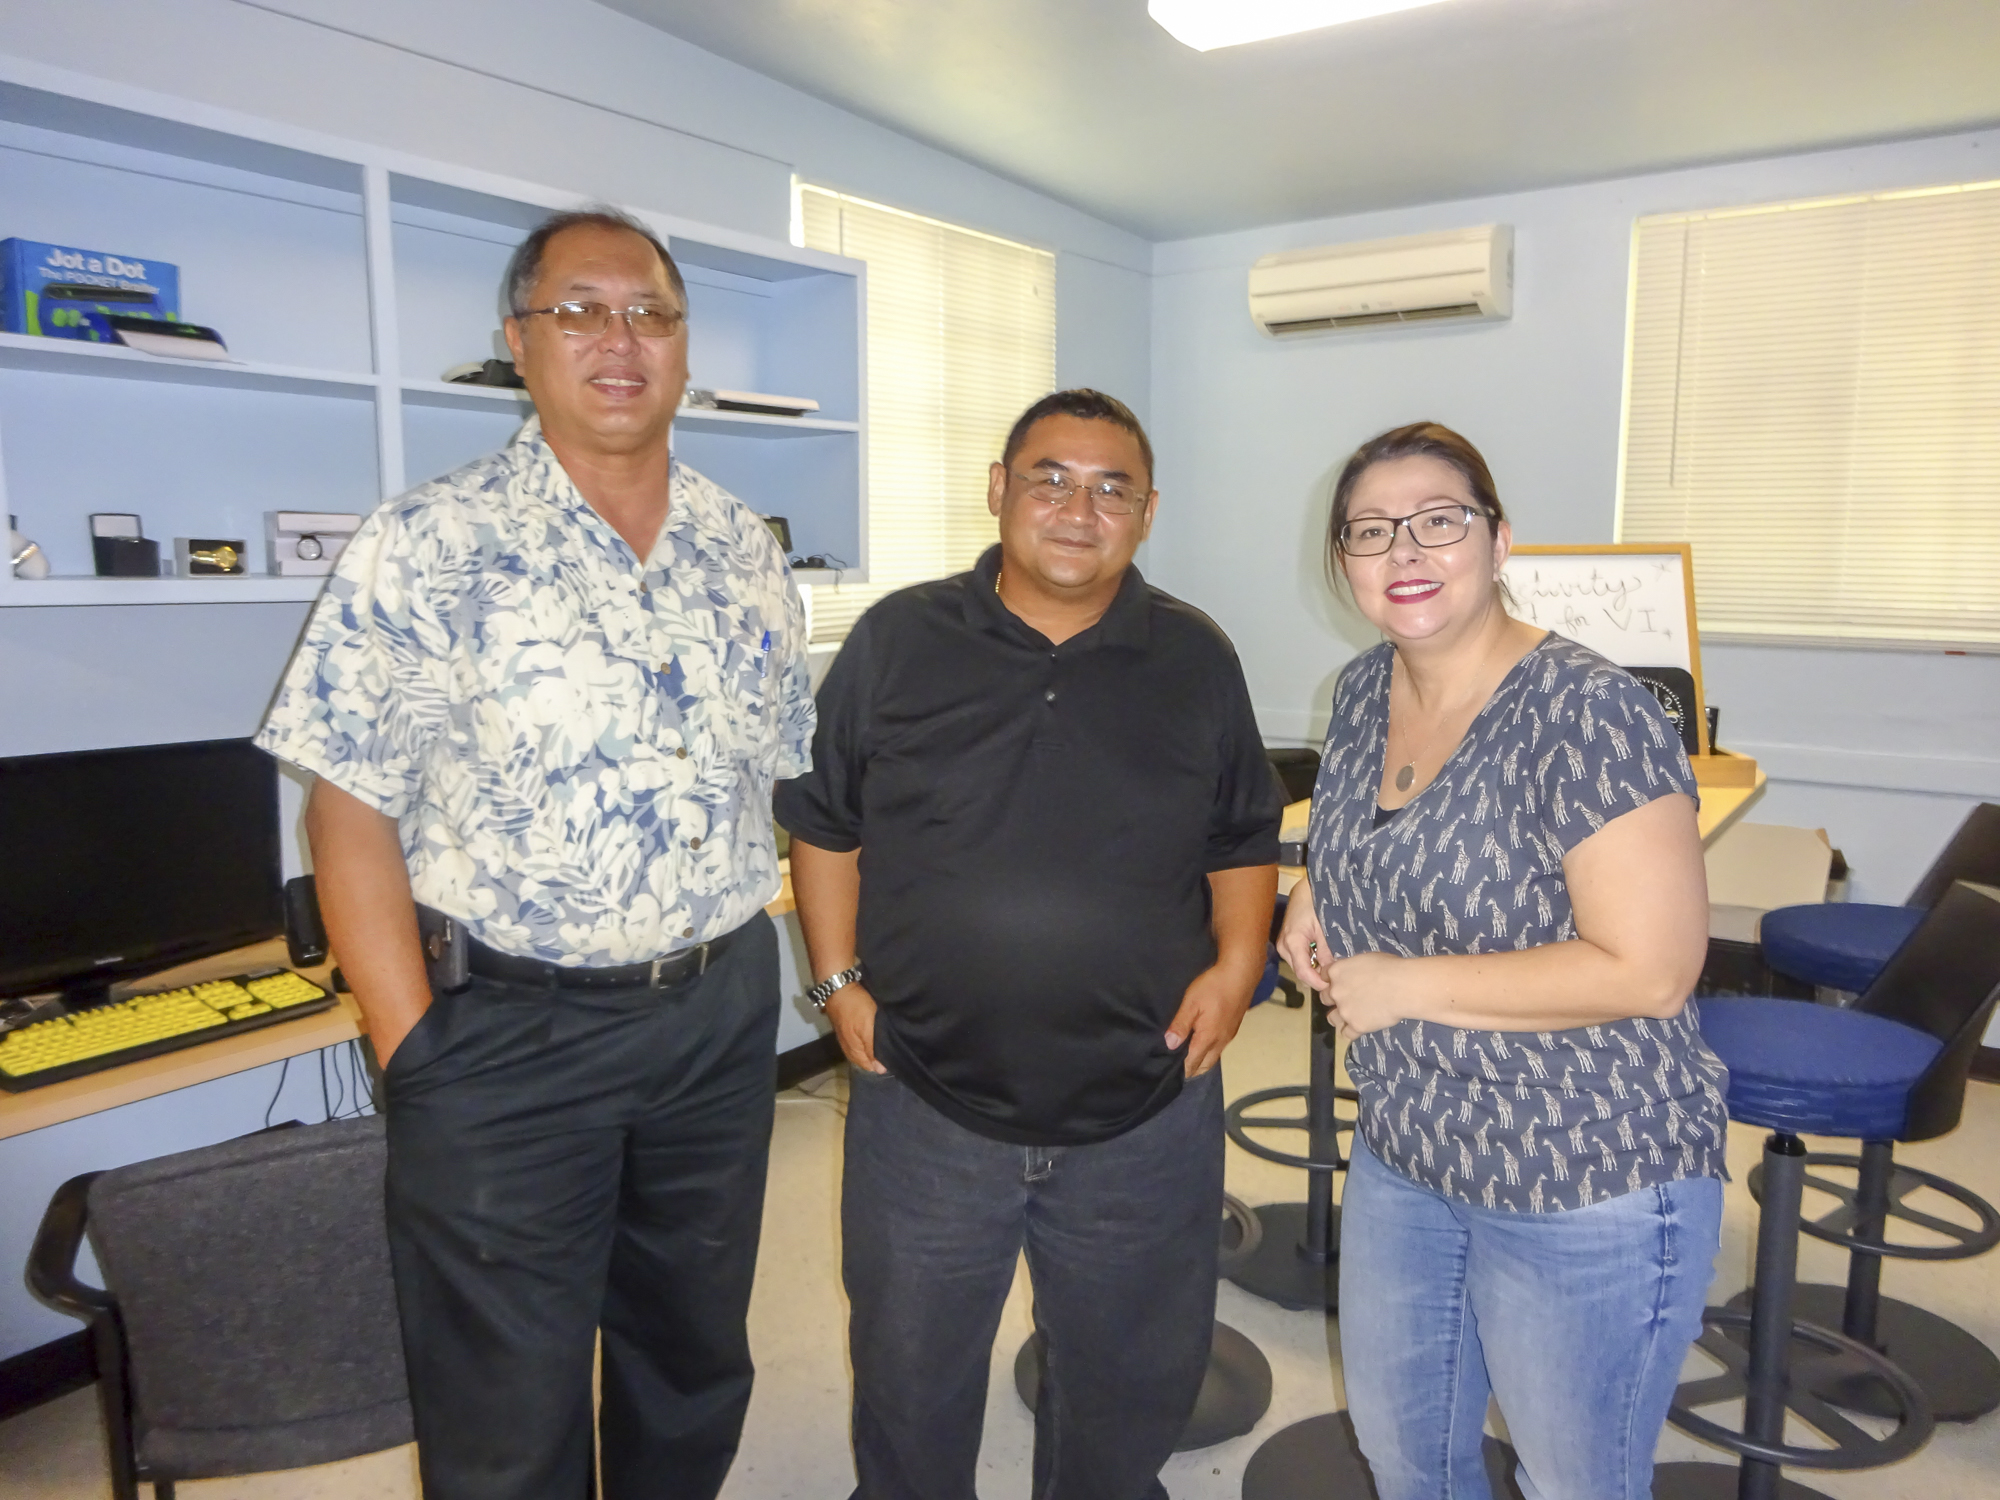 Representatives from the Northern Marianas College University Center for Excellence on Developmental Disabilities (NMC UCEDD) visited the GSAT AT Center on Monday, June 6. Pictured from left to right: Vince Merfalen, NMC Community Development Institute Director; Floyd Masga, Director, NMC UCEDD; and Carla Torres, ATP, AT & Special Projects Program Coordinator.